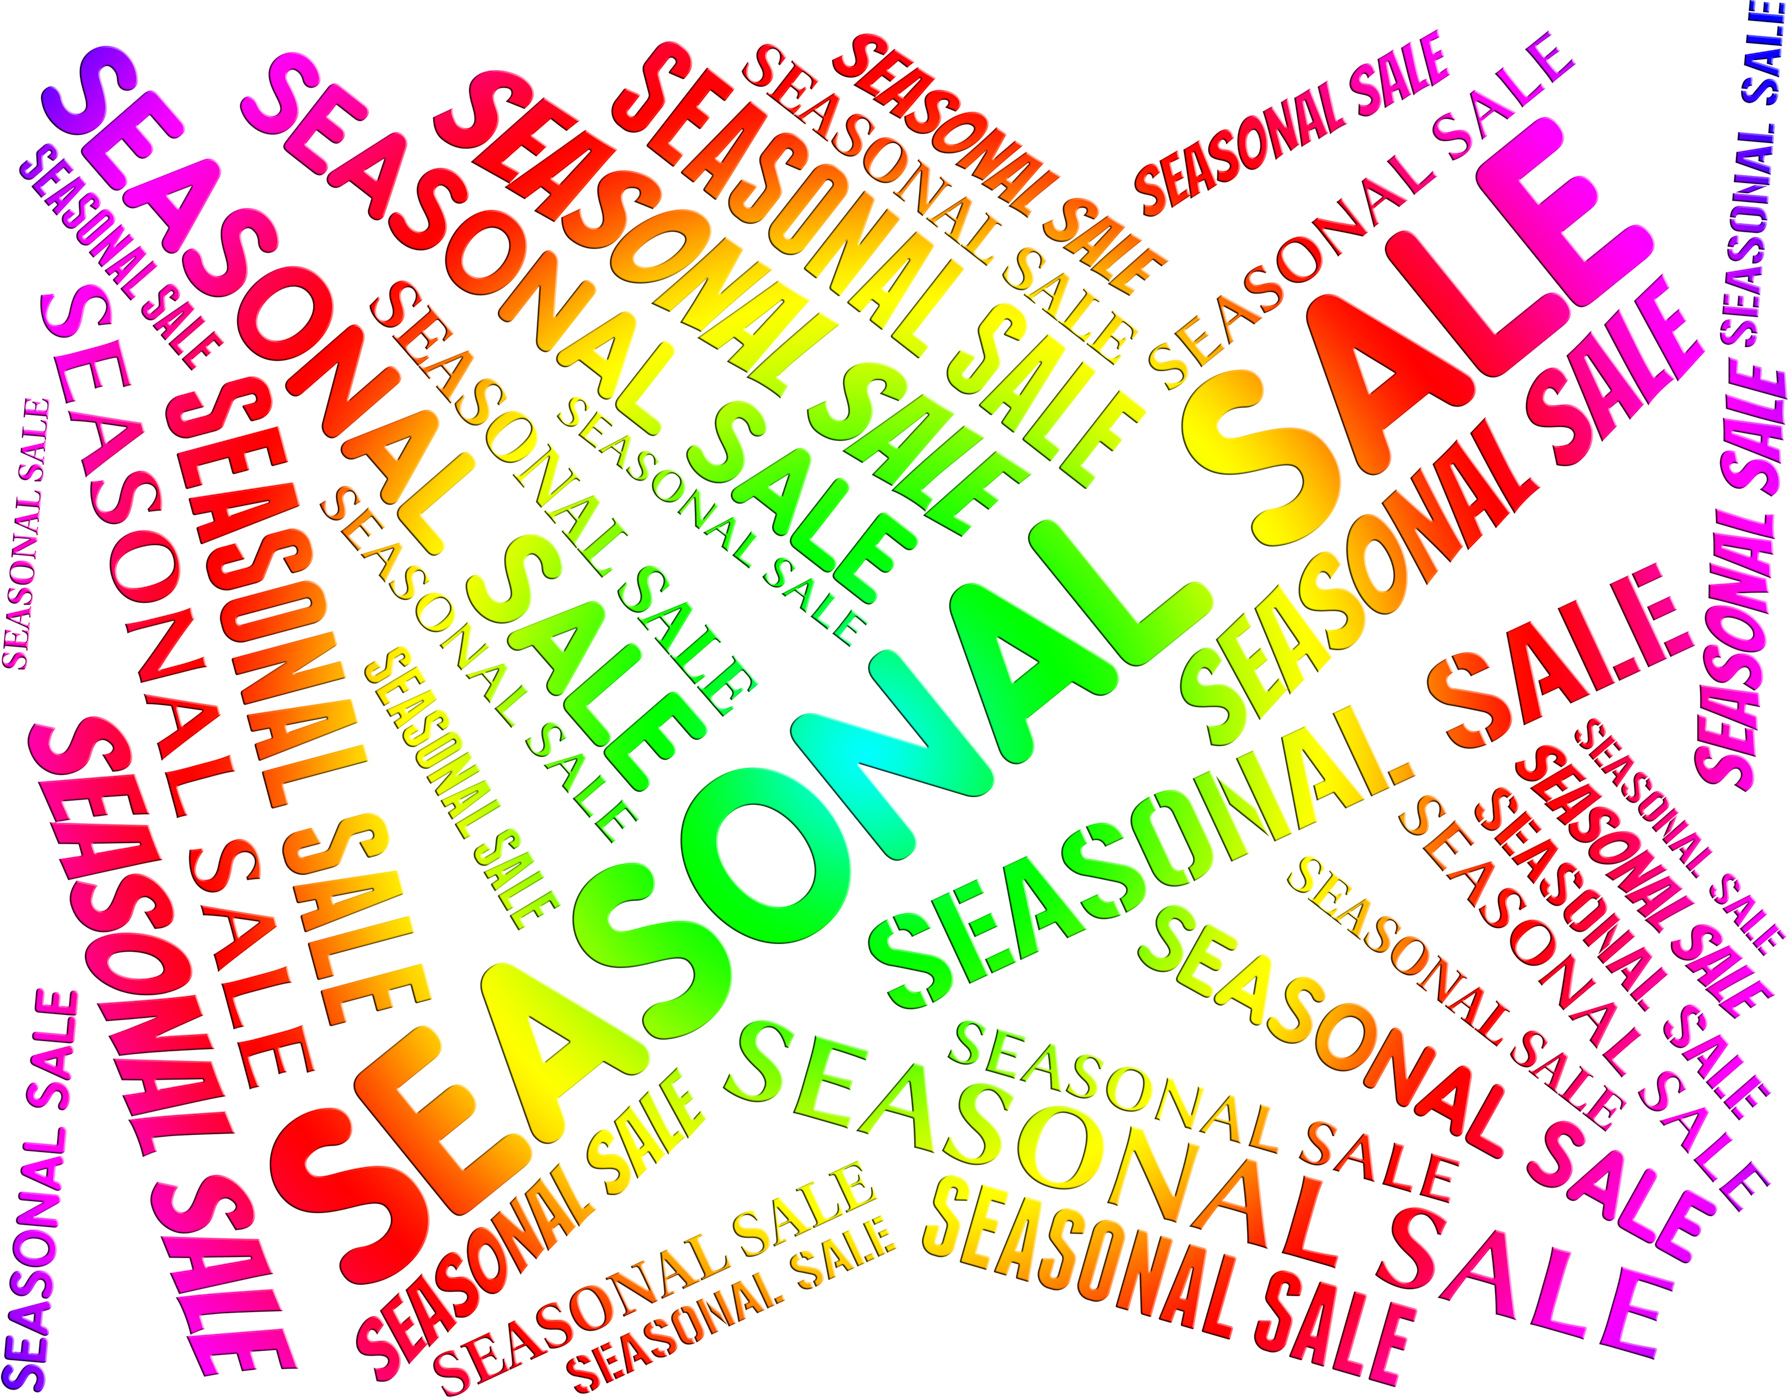 Seasonal sale indicates word words and annually photo